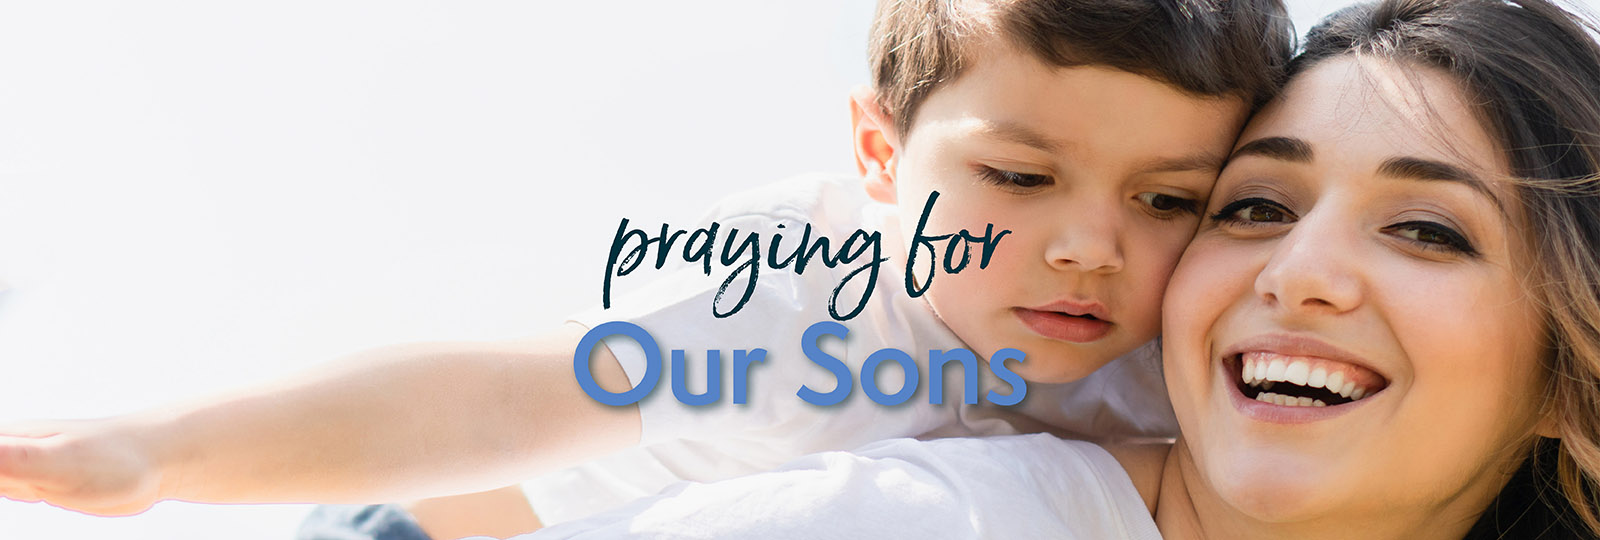 5 Bible Prayers for My Son